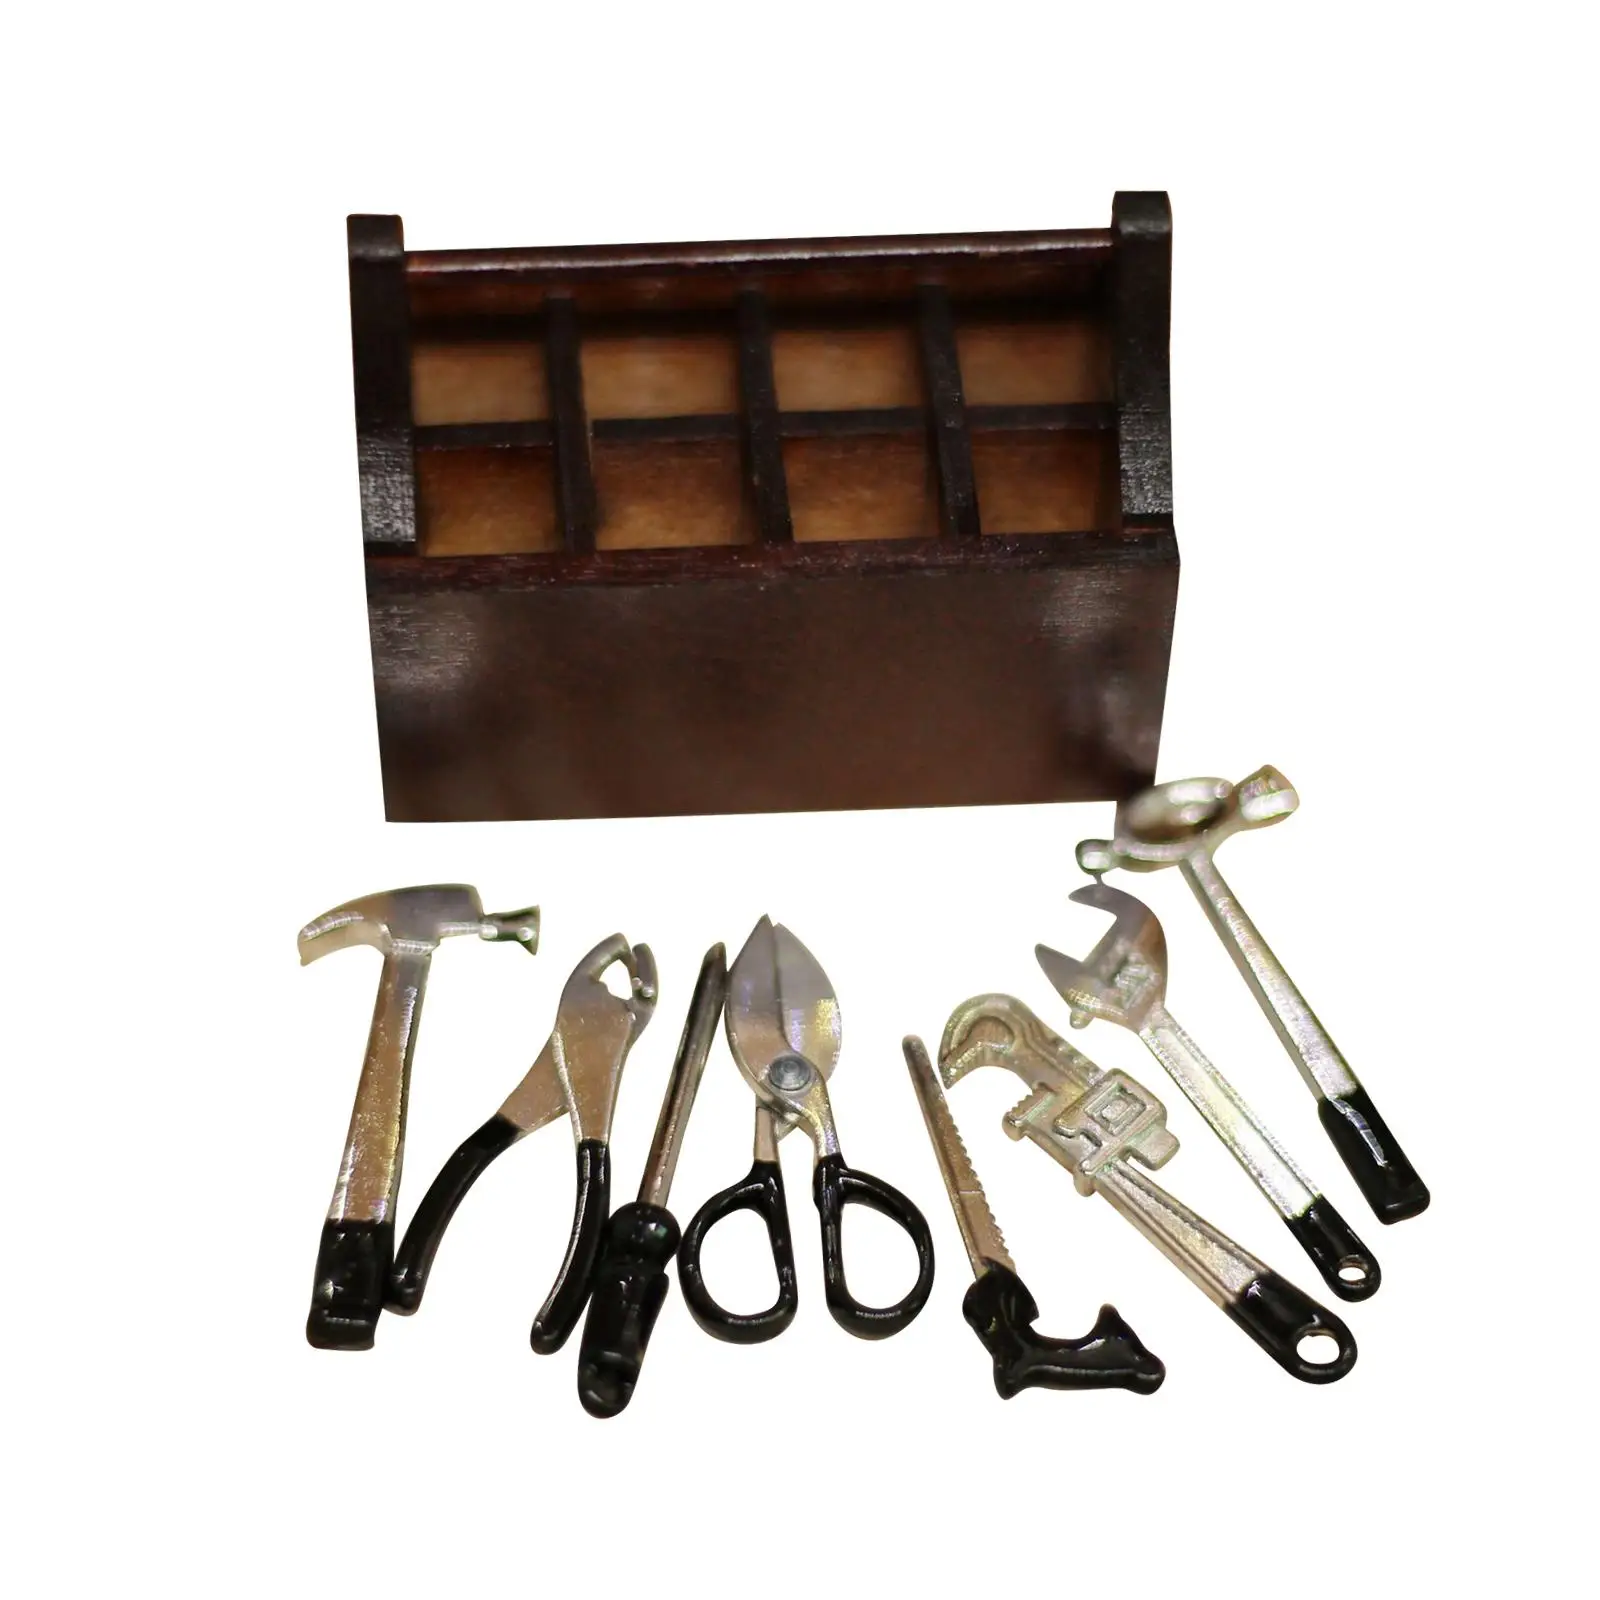 1:12 Scale Dollhouse Repair Tools with Storage Case for DIY Scenes Gifts